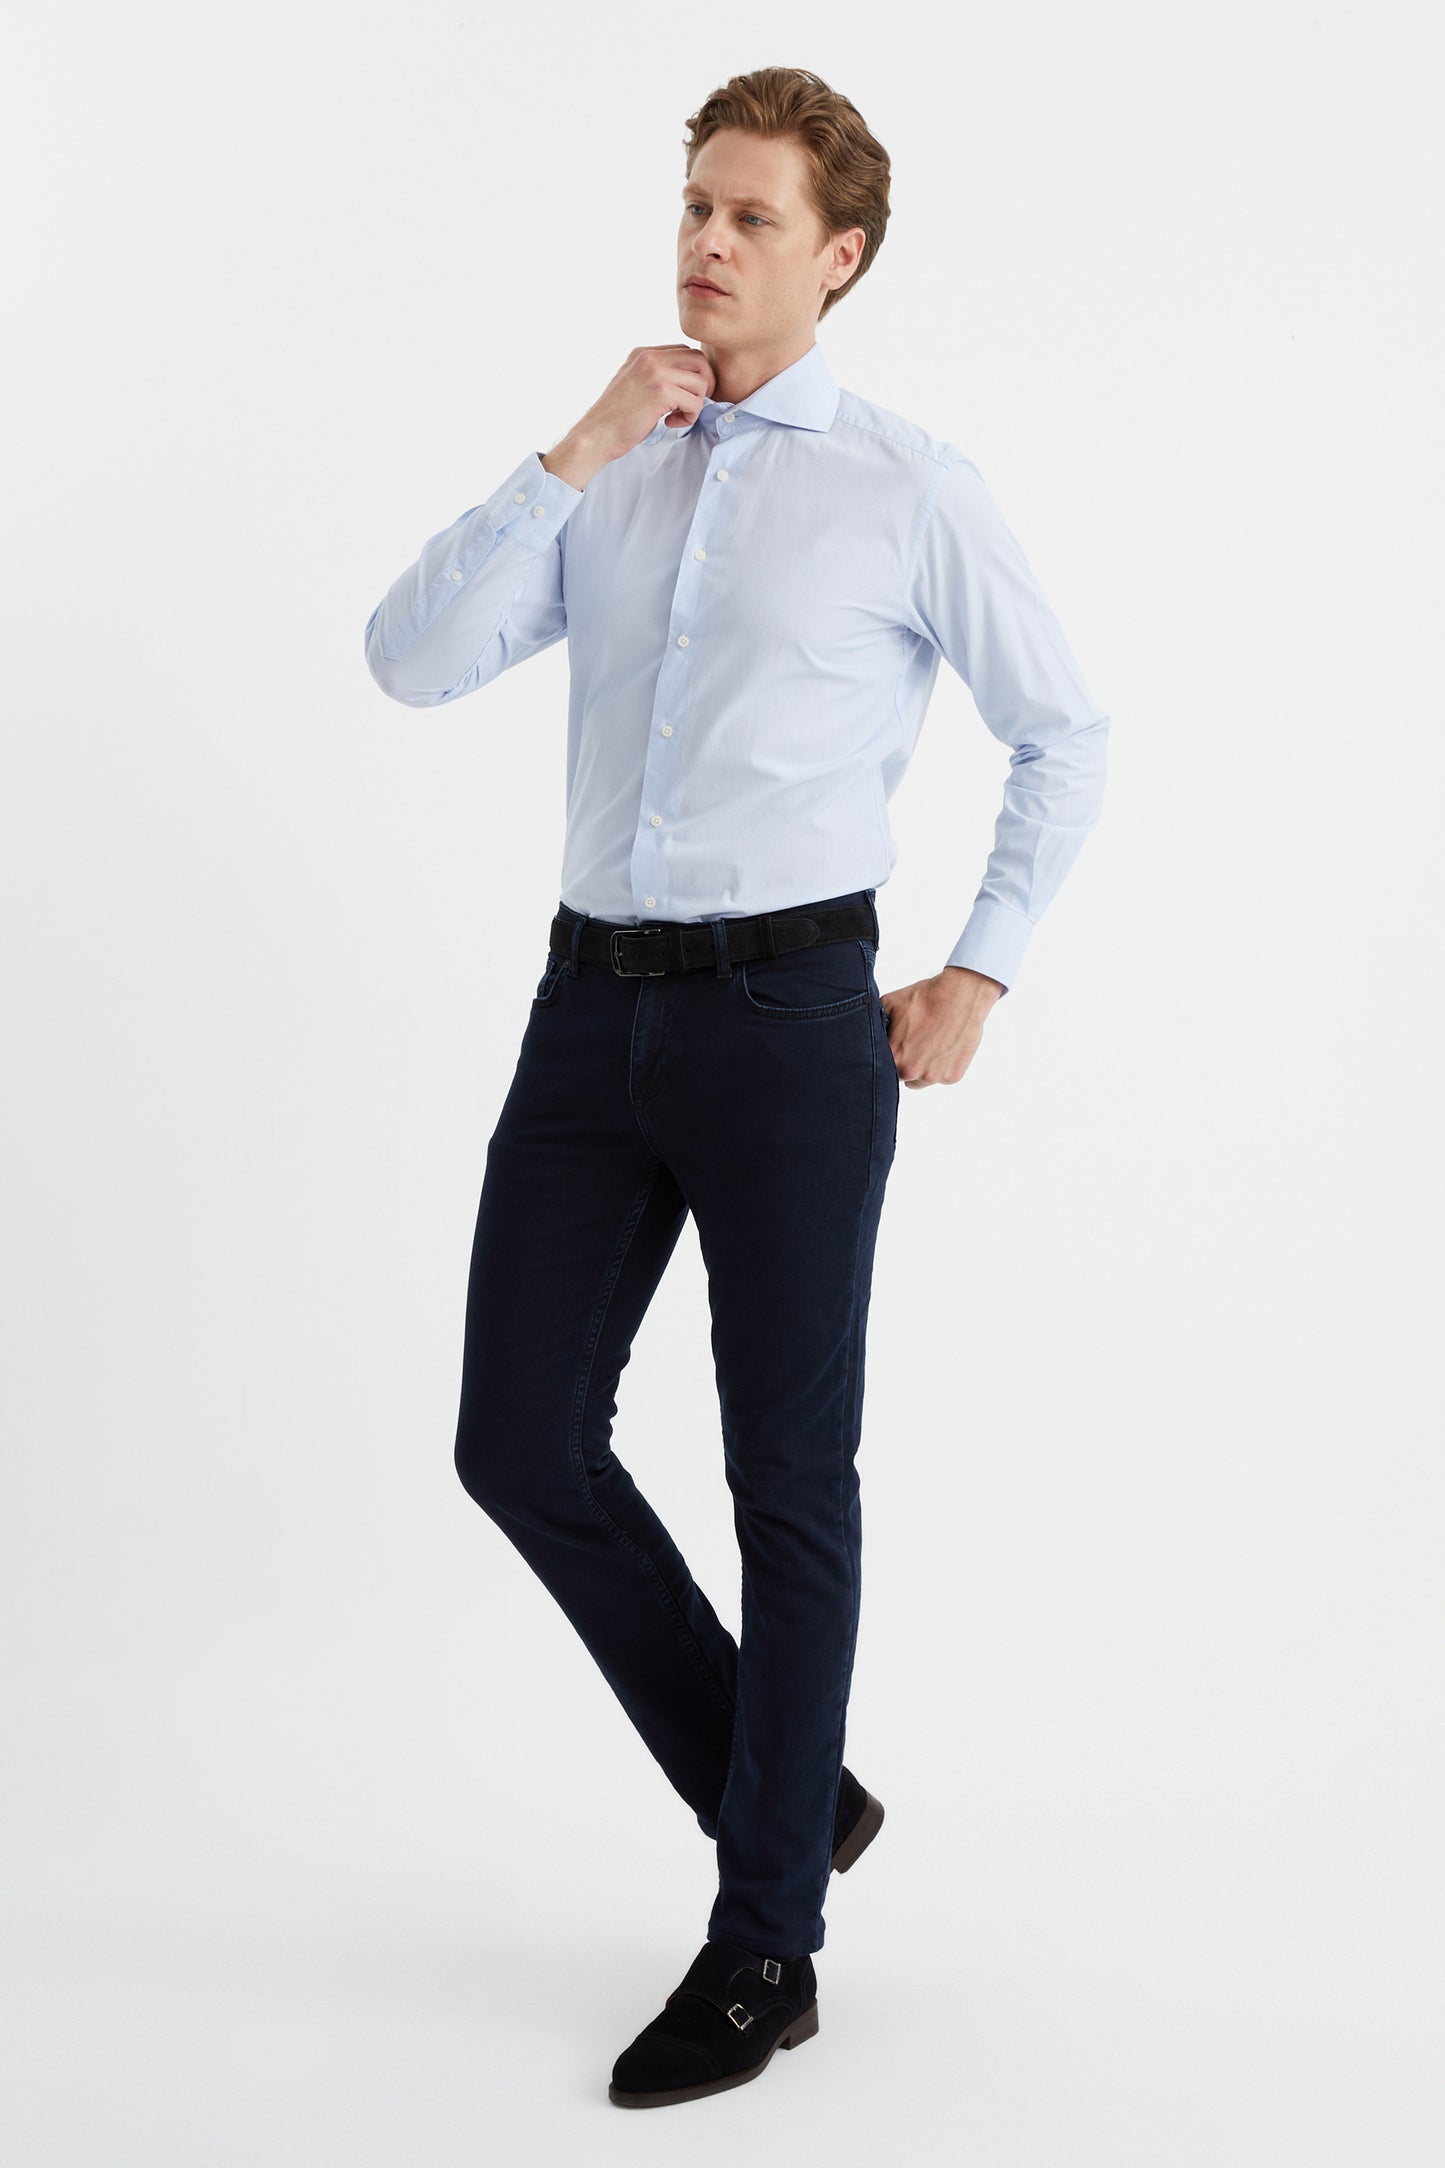 DFR89 stretchy, premium denim jeans, navy blue. Built for style and comfort